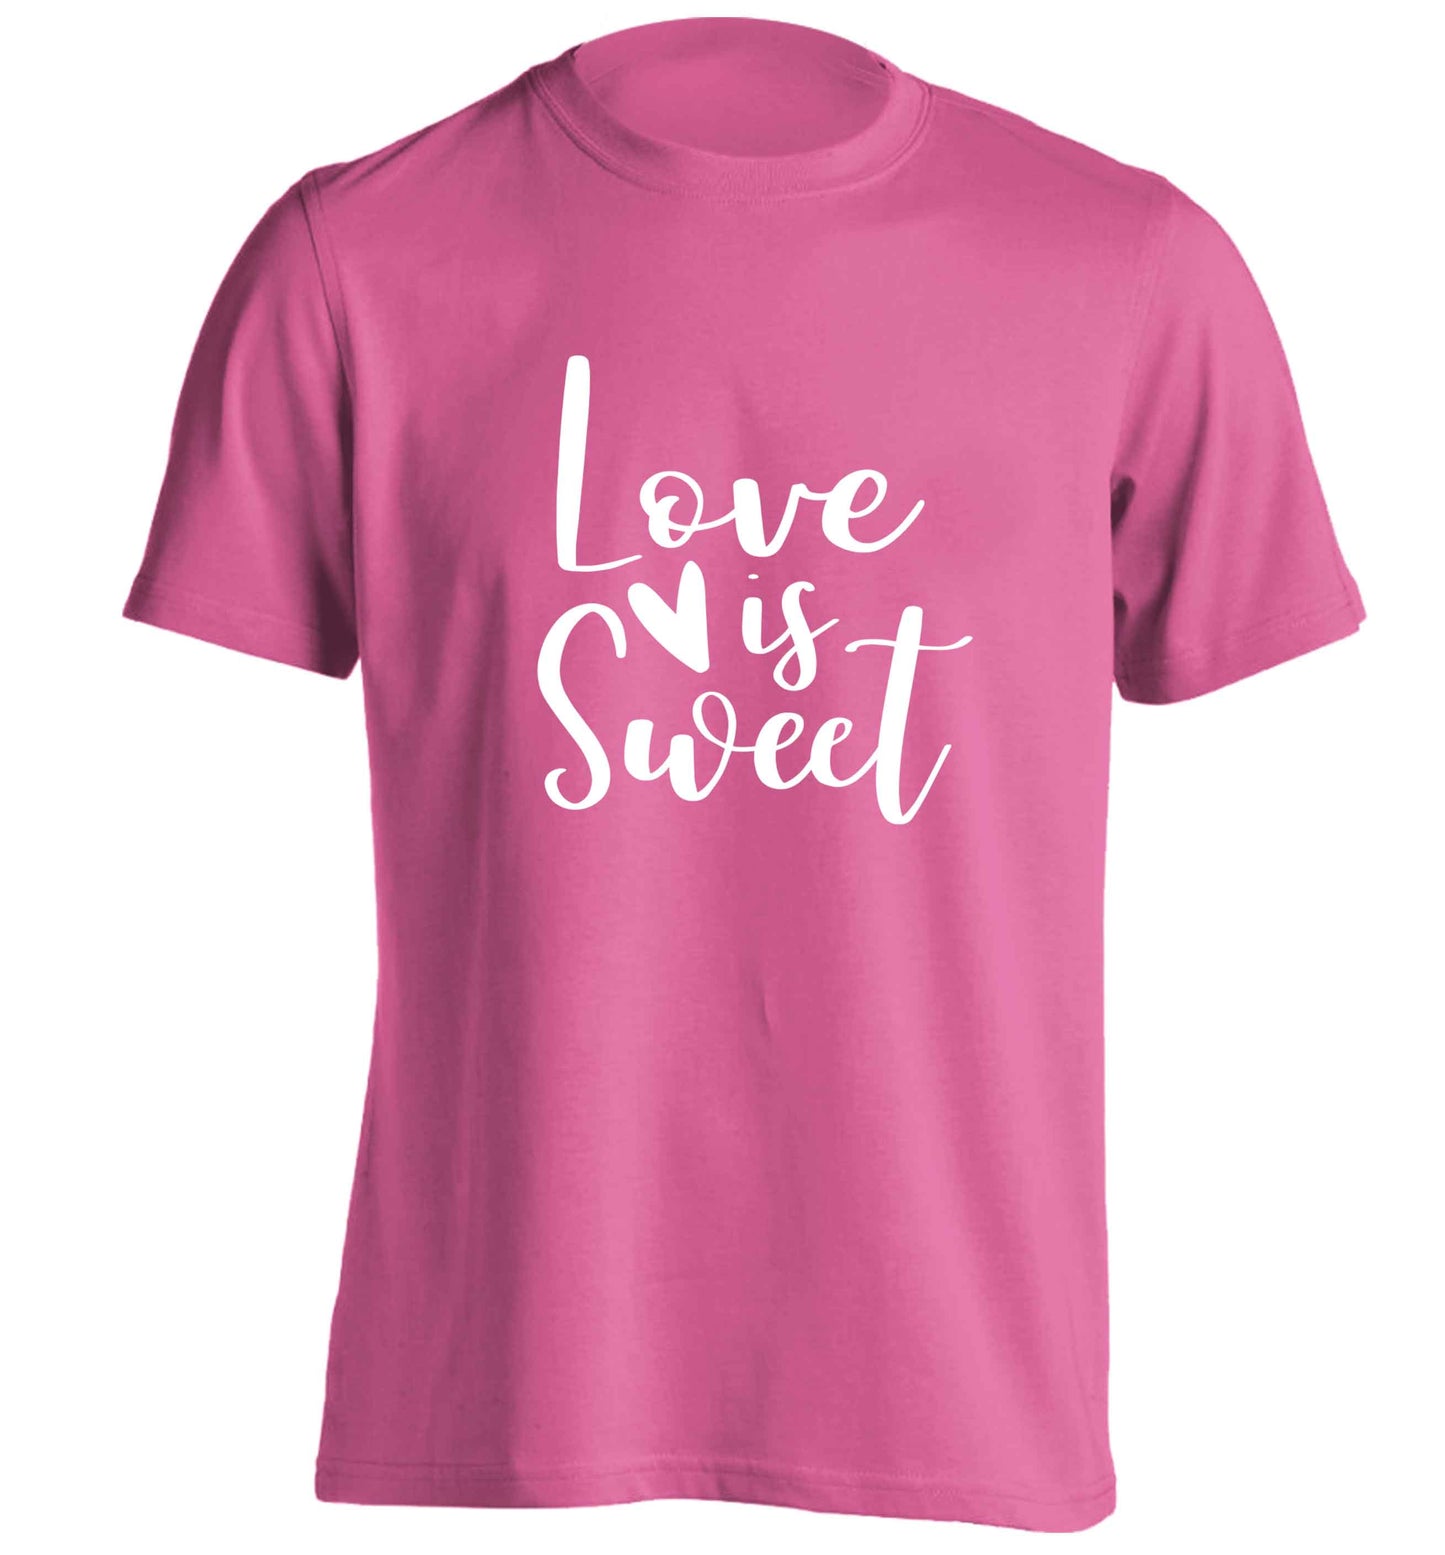 Love really does make the world go round! Ideal for weddings, valentines or just simply to show someone you love them!  adults unisex pink Tshirt 2XL